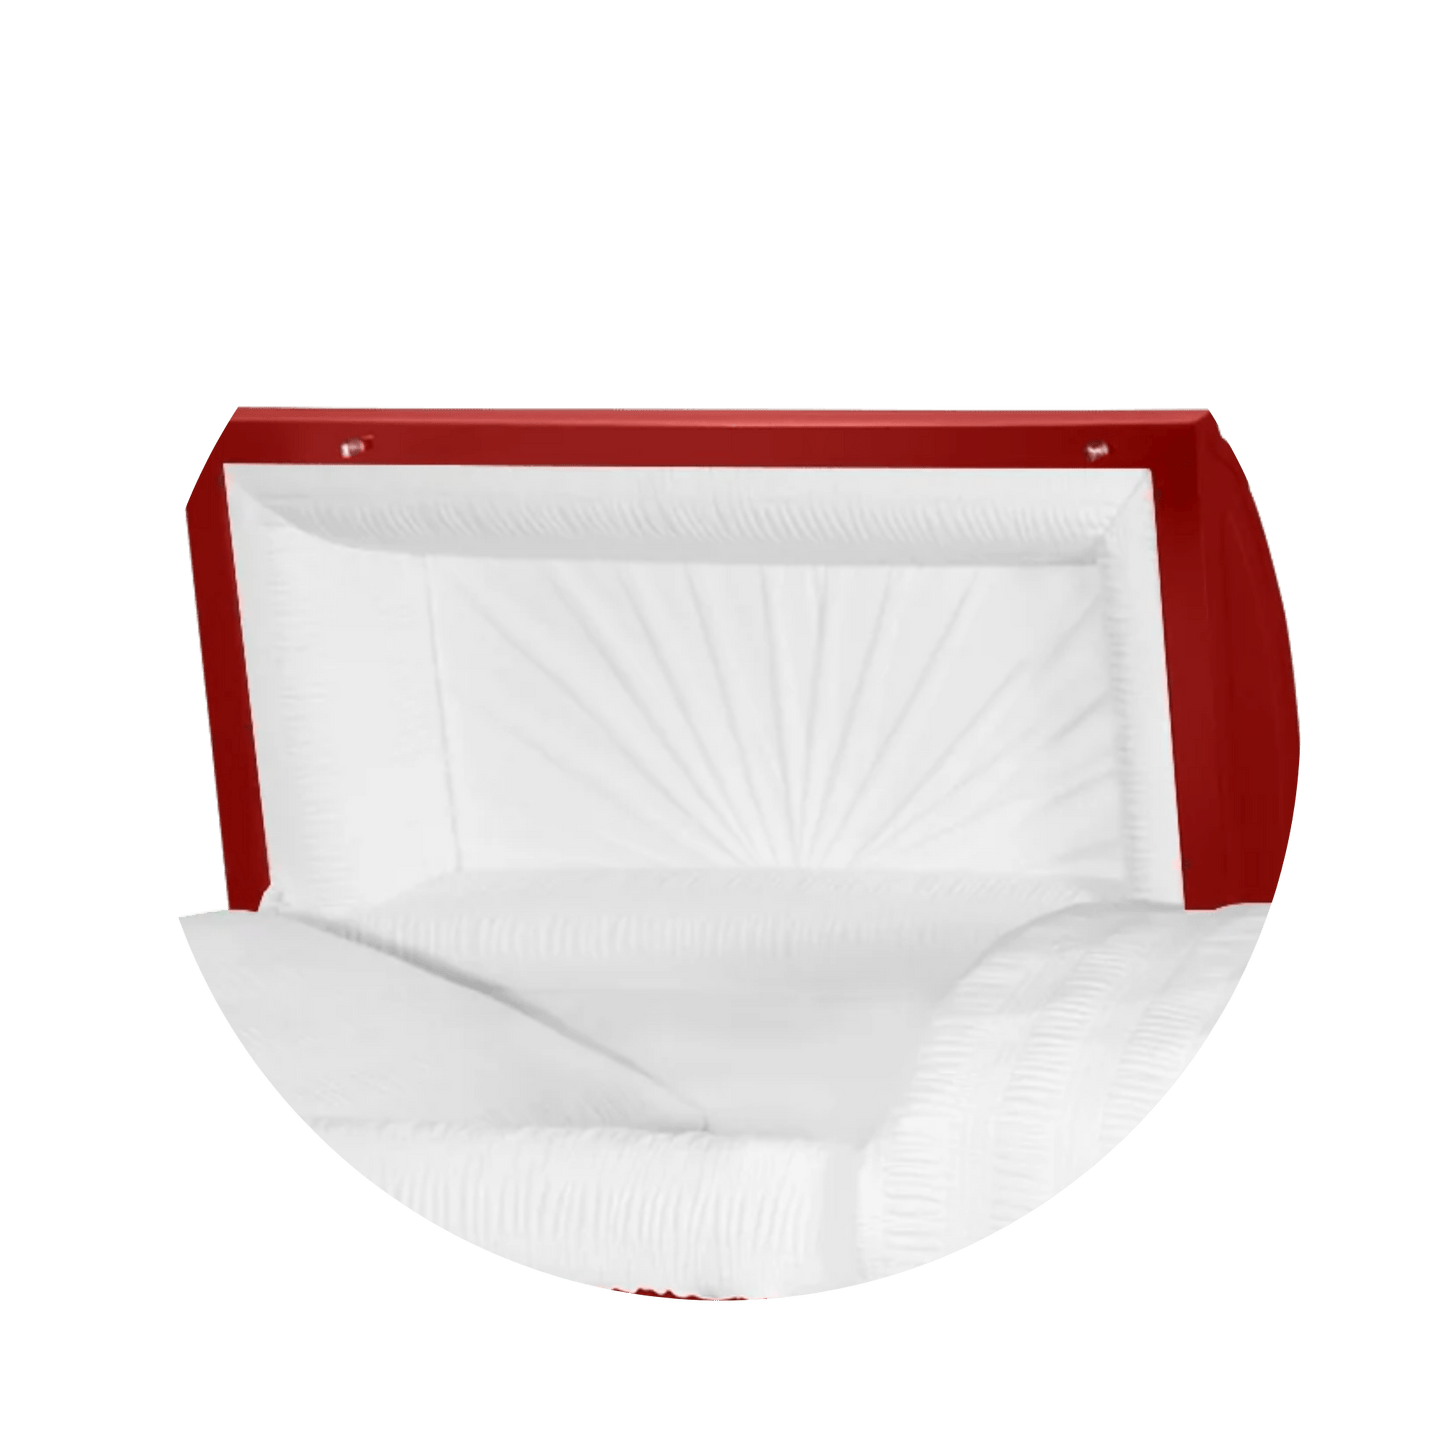 Reflections XL | Red Steel Oversize Casket with White Interior